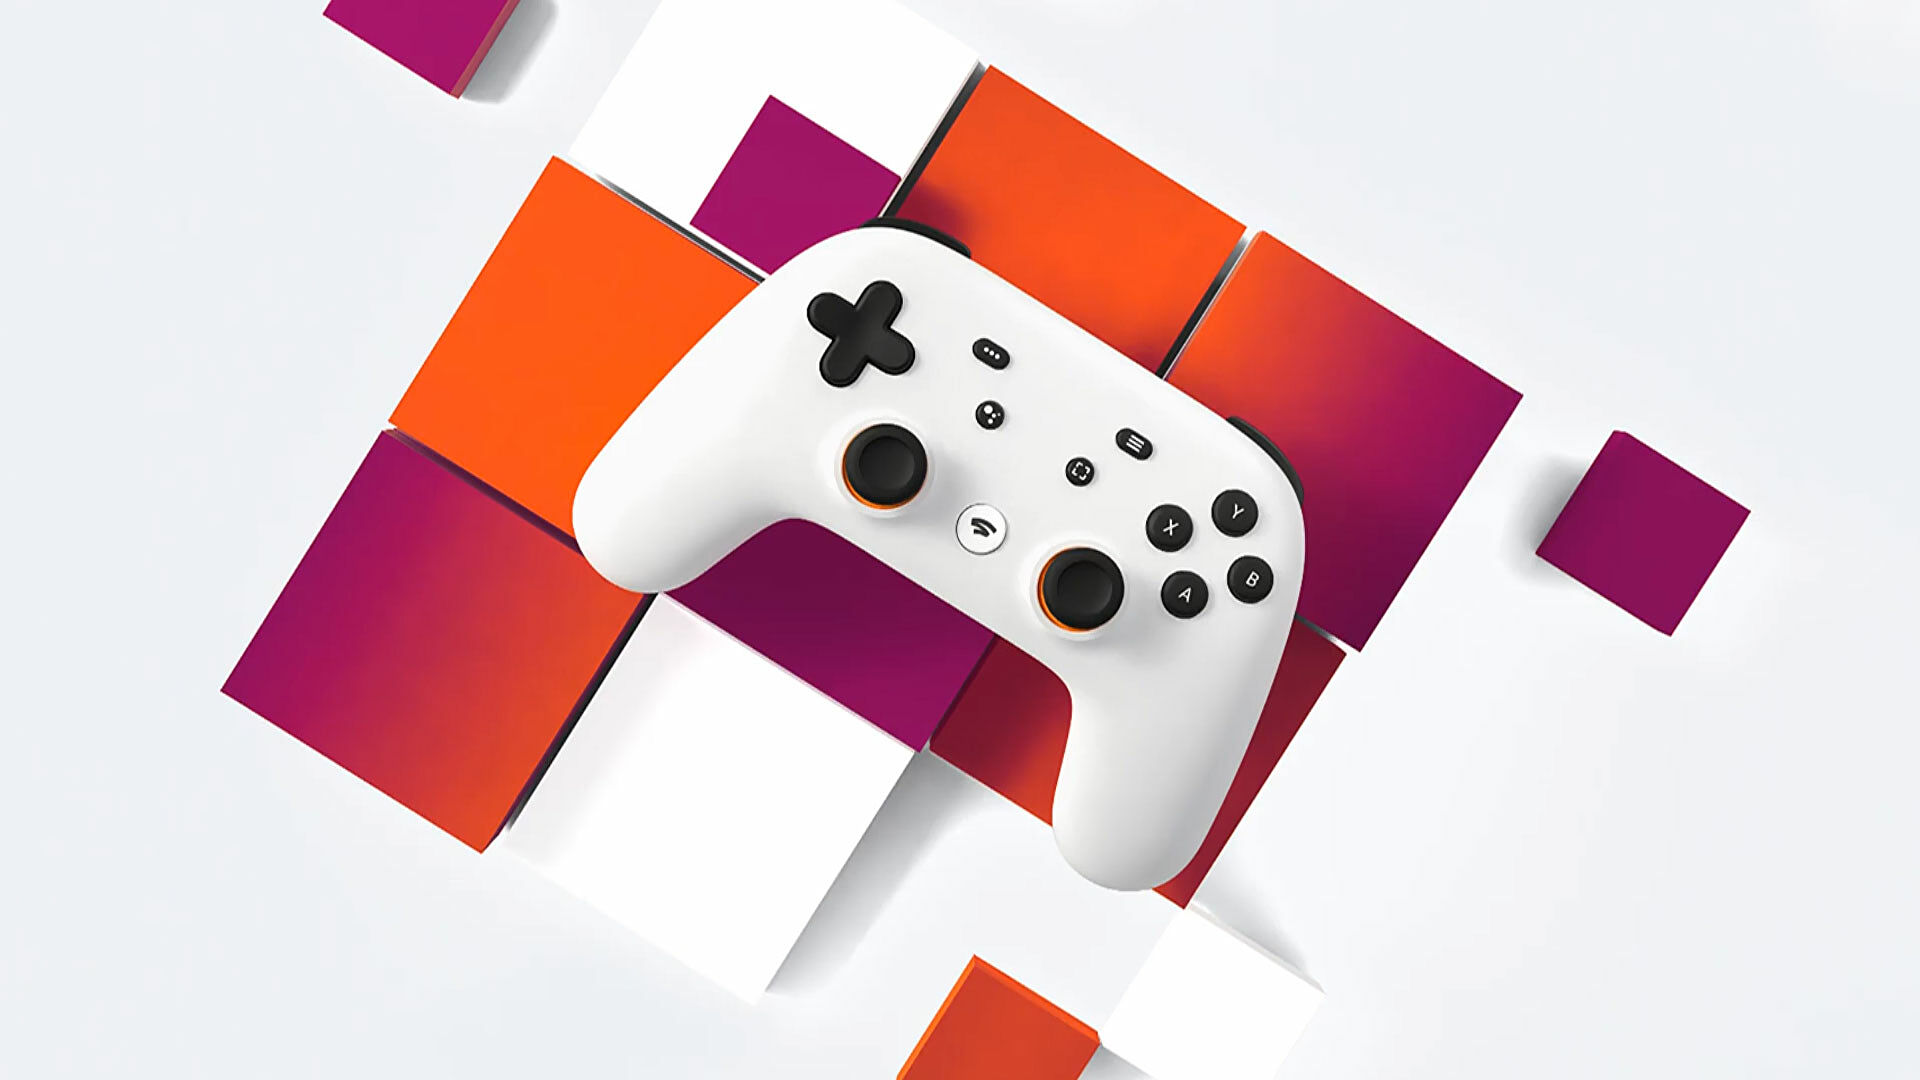 Google offer “humble thanks” to Stadia players with free prototype game